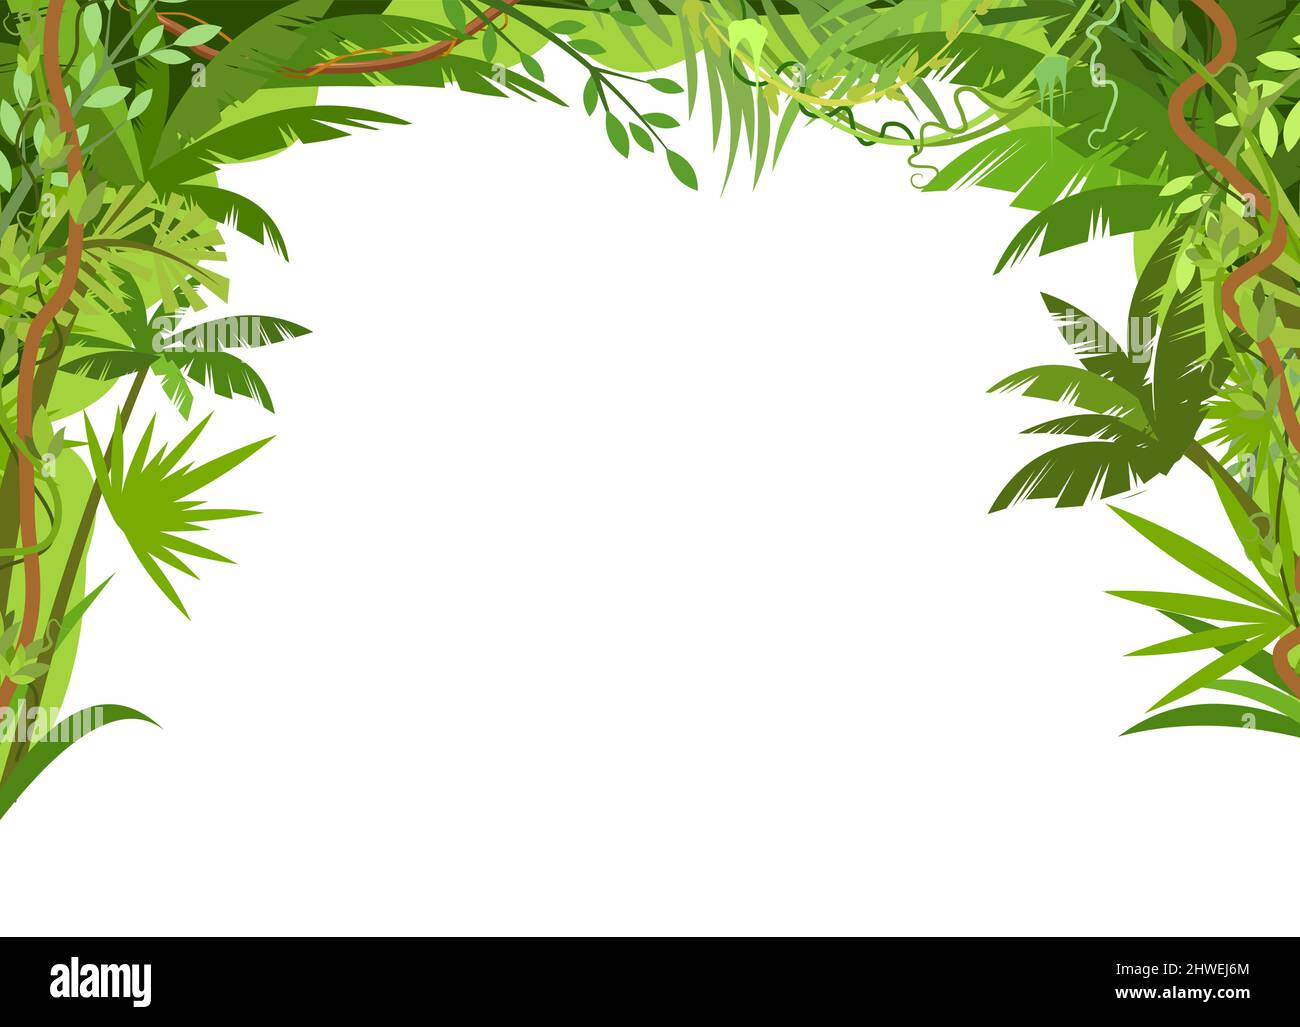 Rainforest canopy. Jungle frame. Branches of tropical trees, grasses and bushes. Curly shoots and stems of vines. Flat cartoon style. In the form of Stock Vector